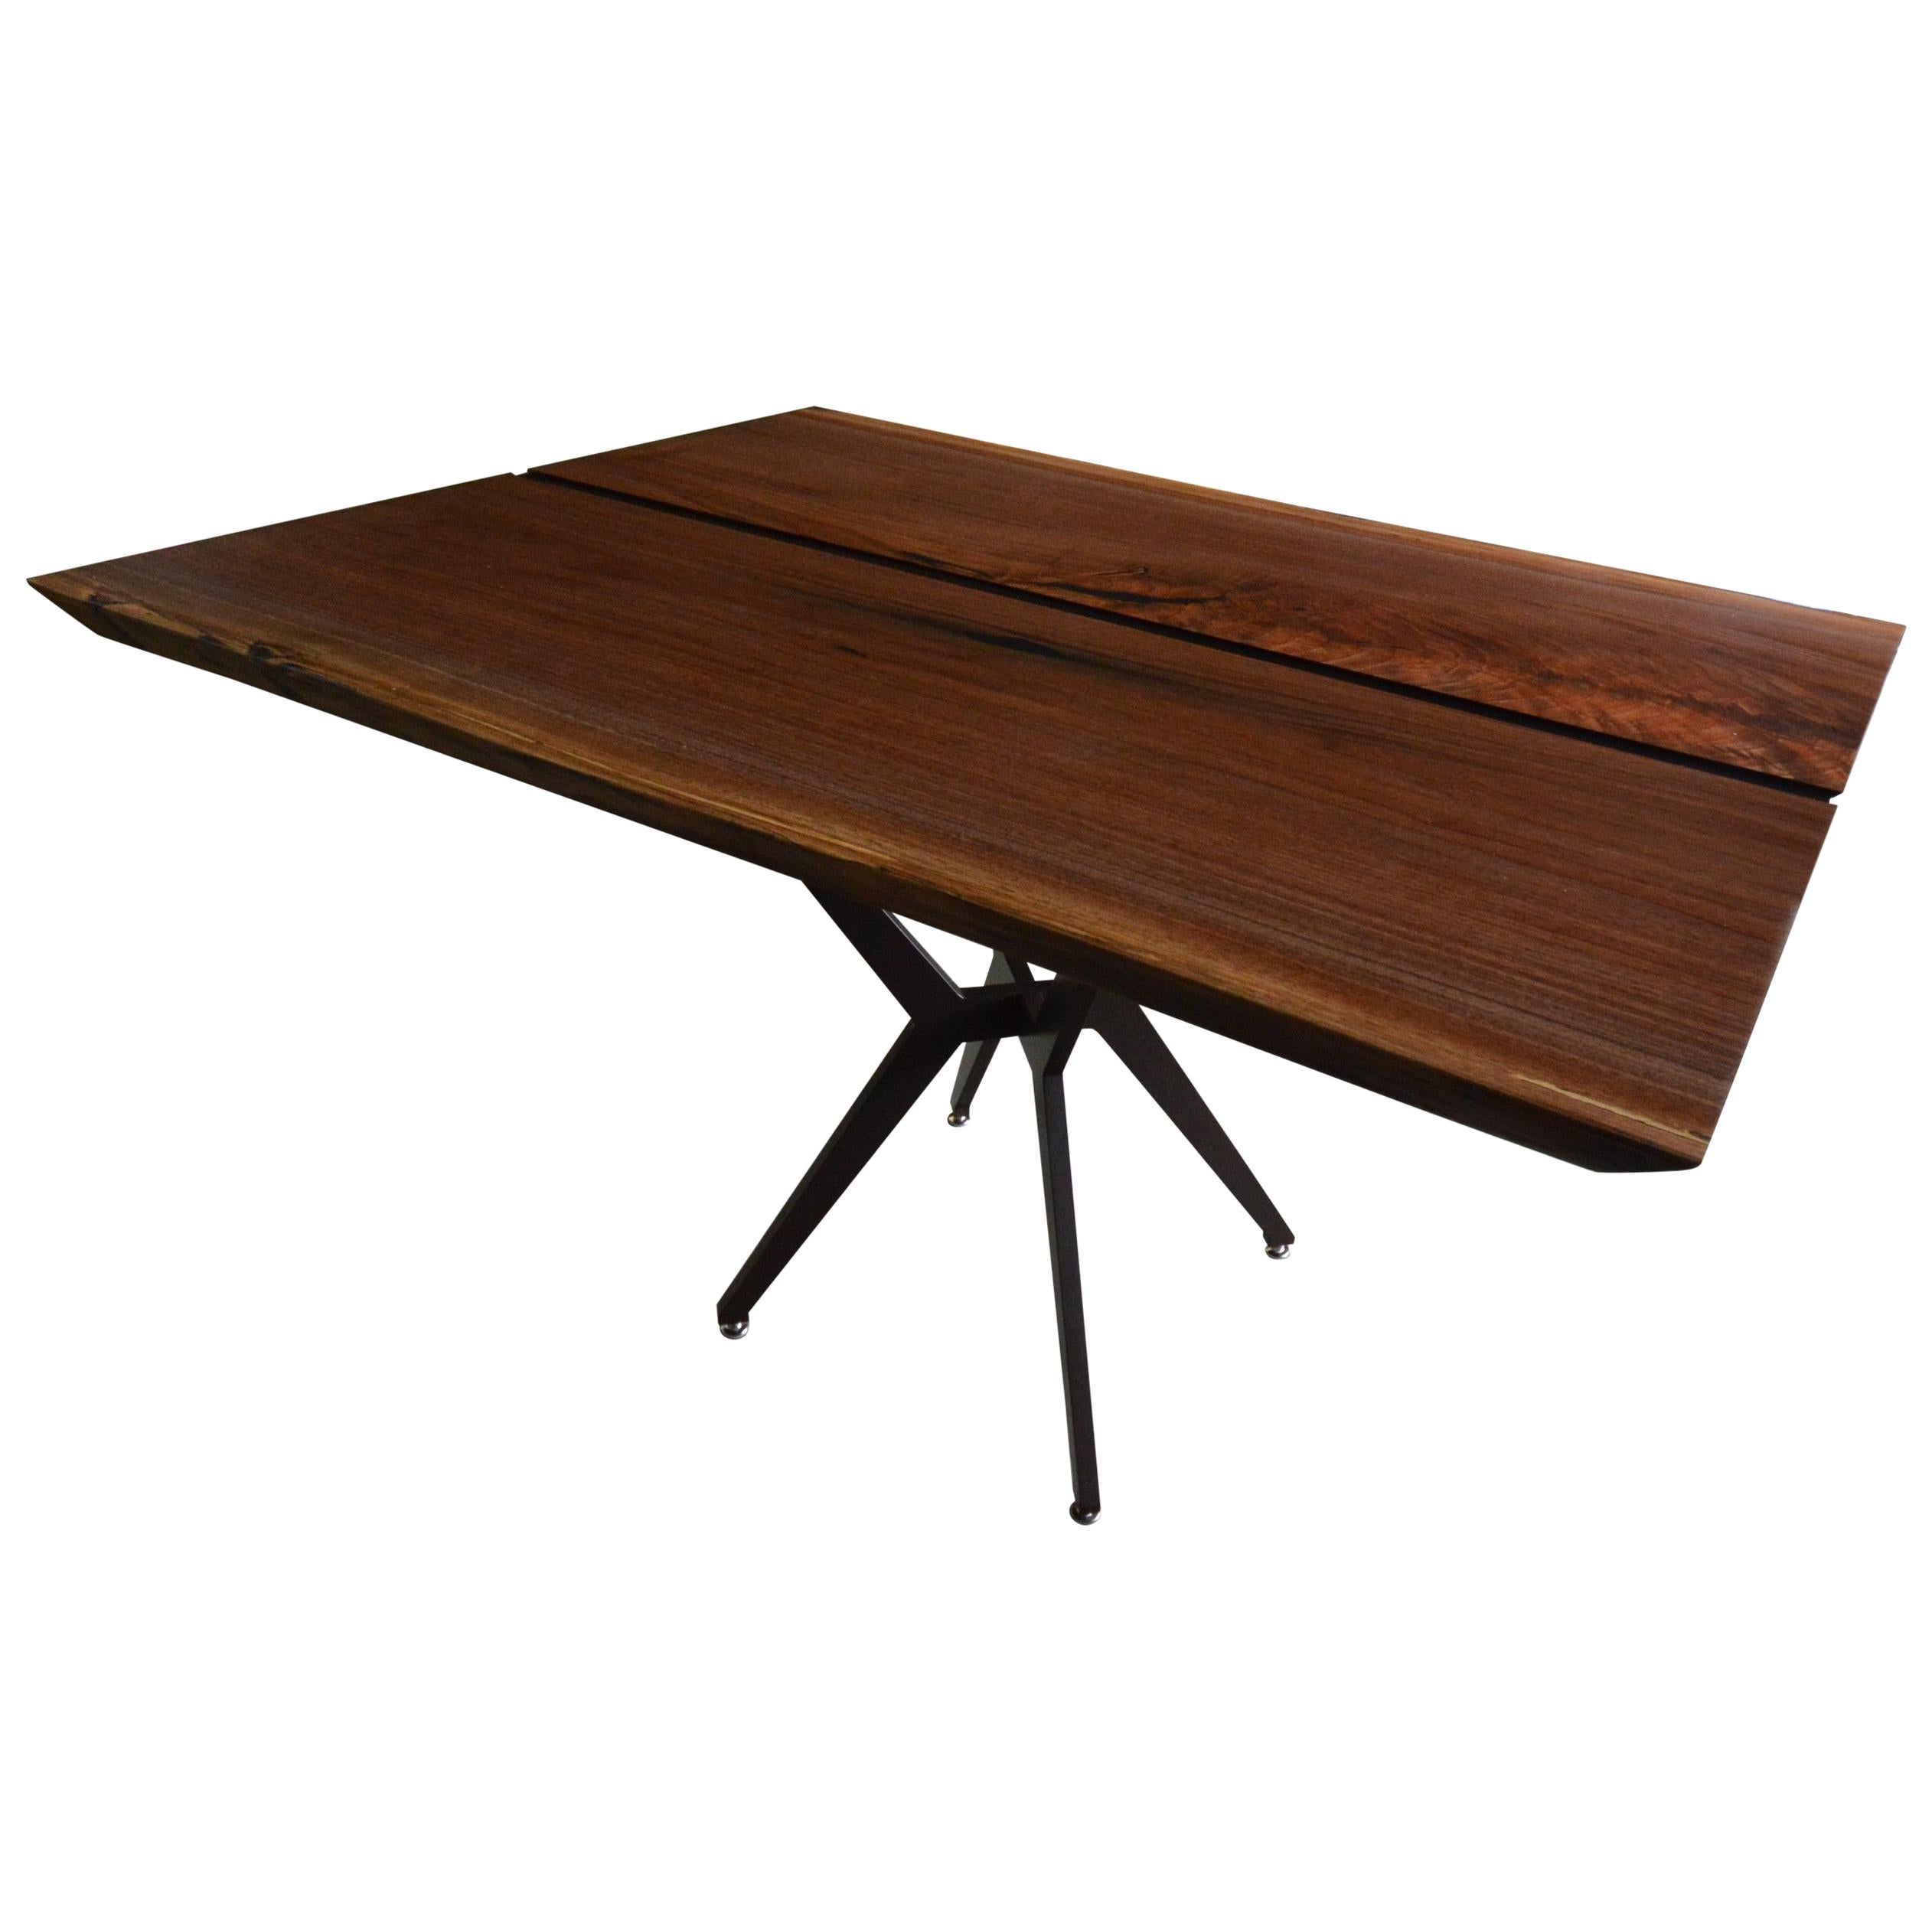 Dining Table Made From Solid Walnut with Sleek Steel Legs in Brushed Bronze For Sale